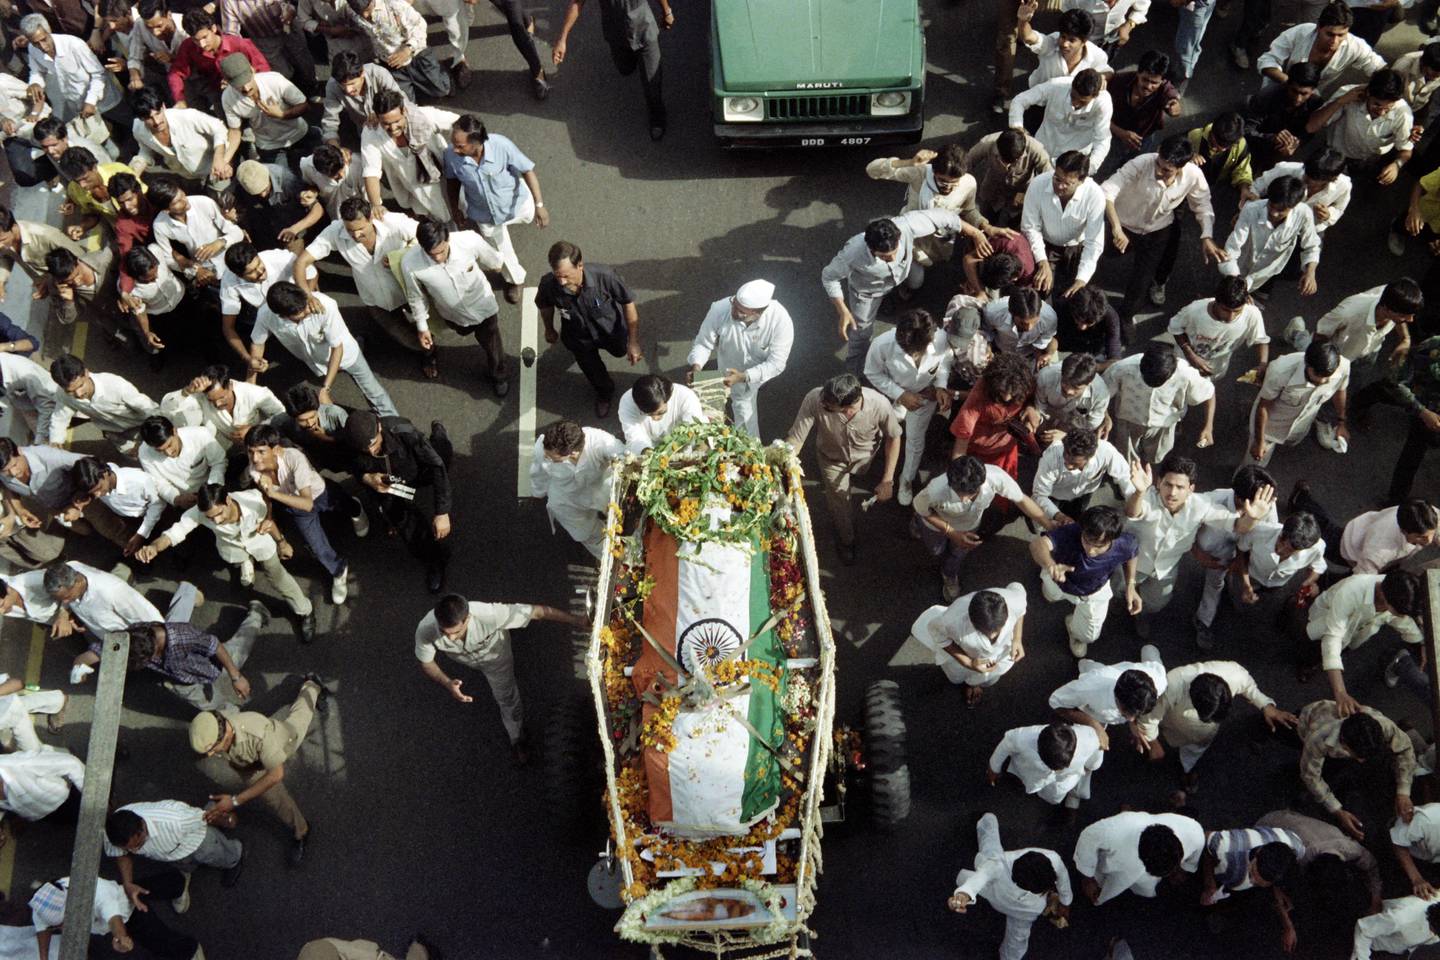 The funeral procession for slain prime minister Rajiv Gandhi moving through the crowded streets of New Delhi in May 1991. AFP